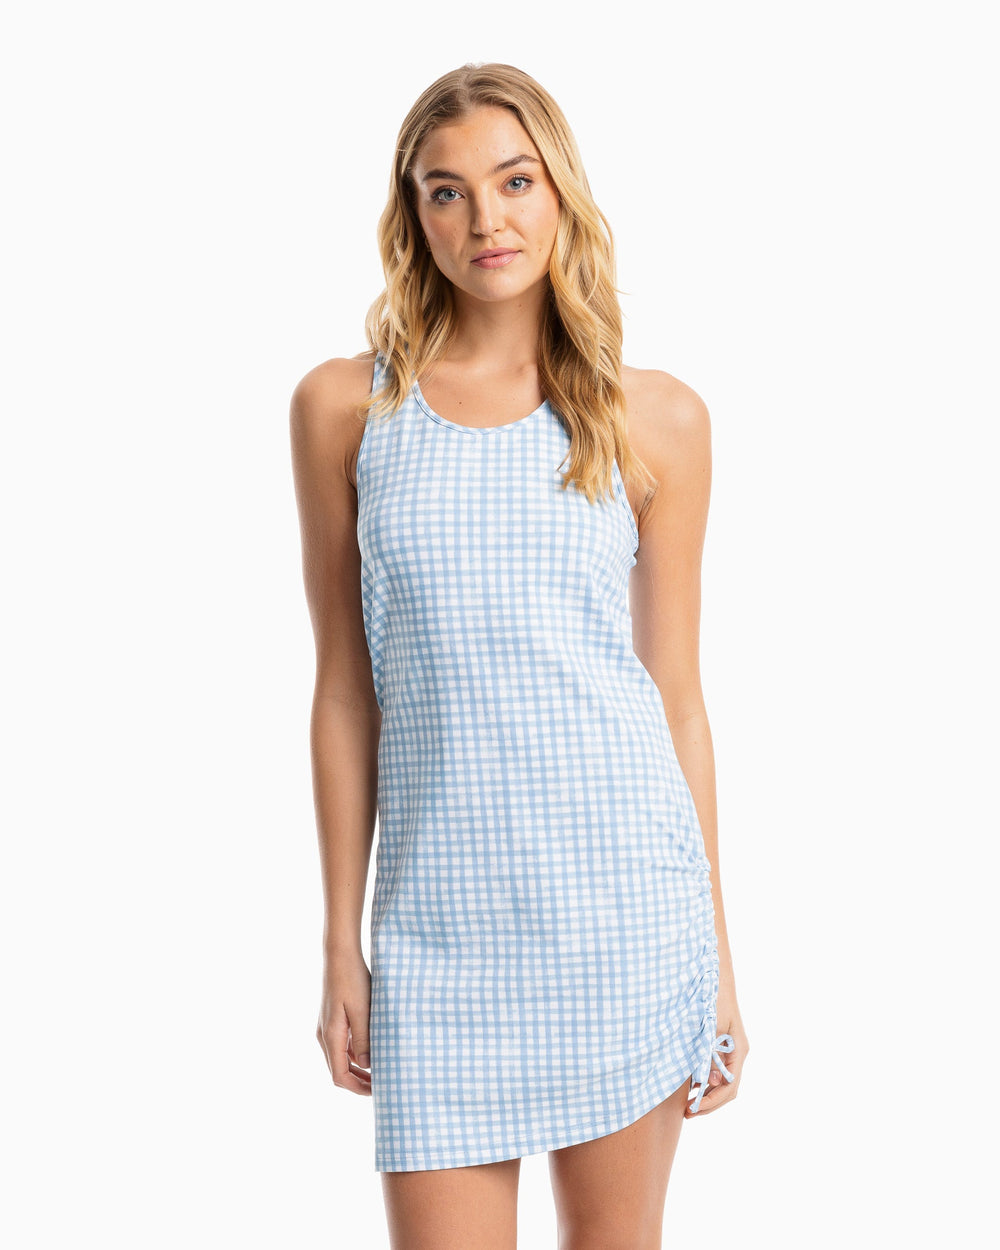 The front view of the Kinsley Performance Dress by Southern Tide - Sky Blue